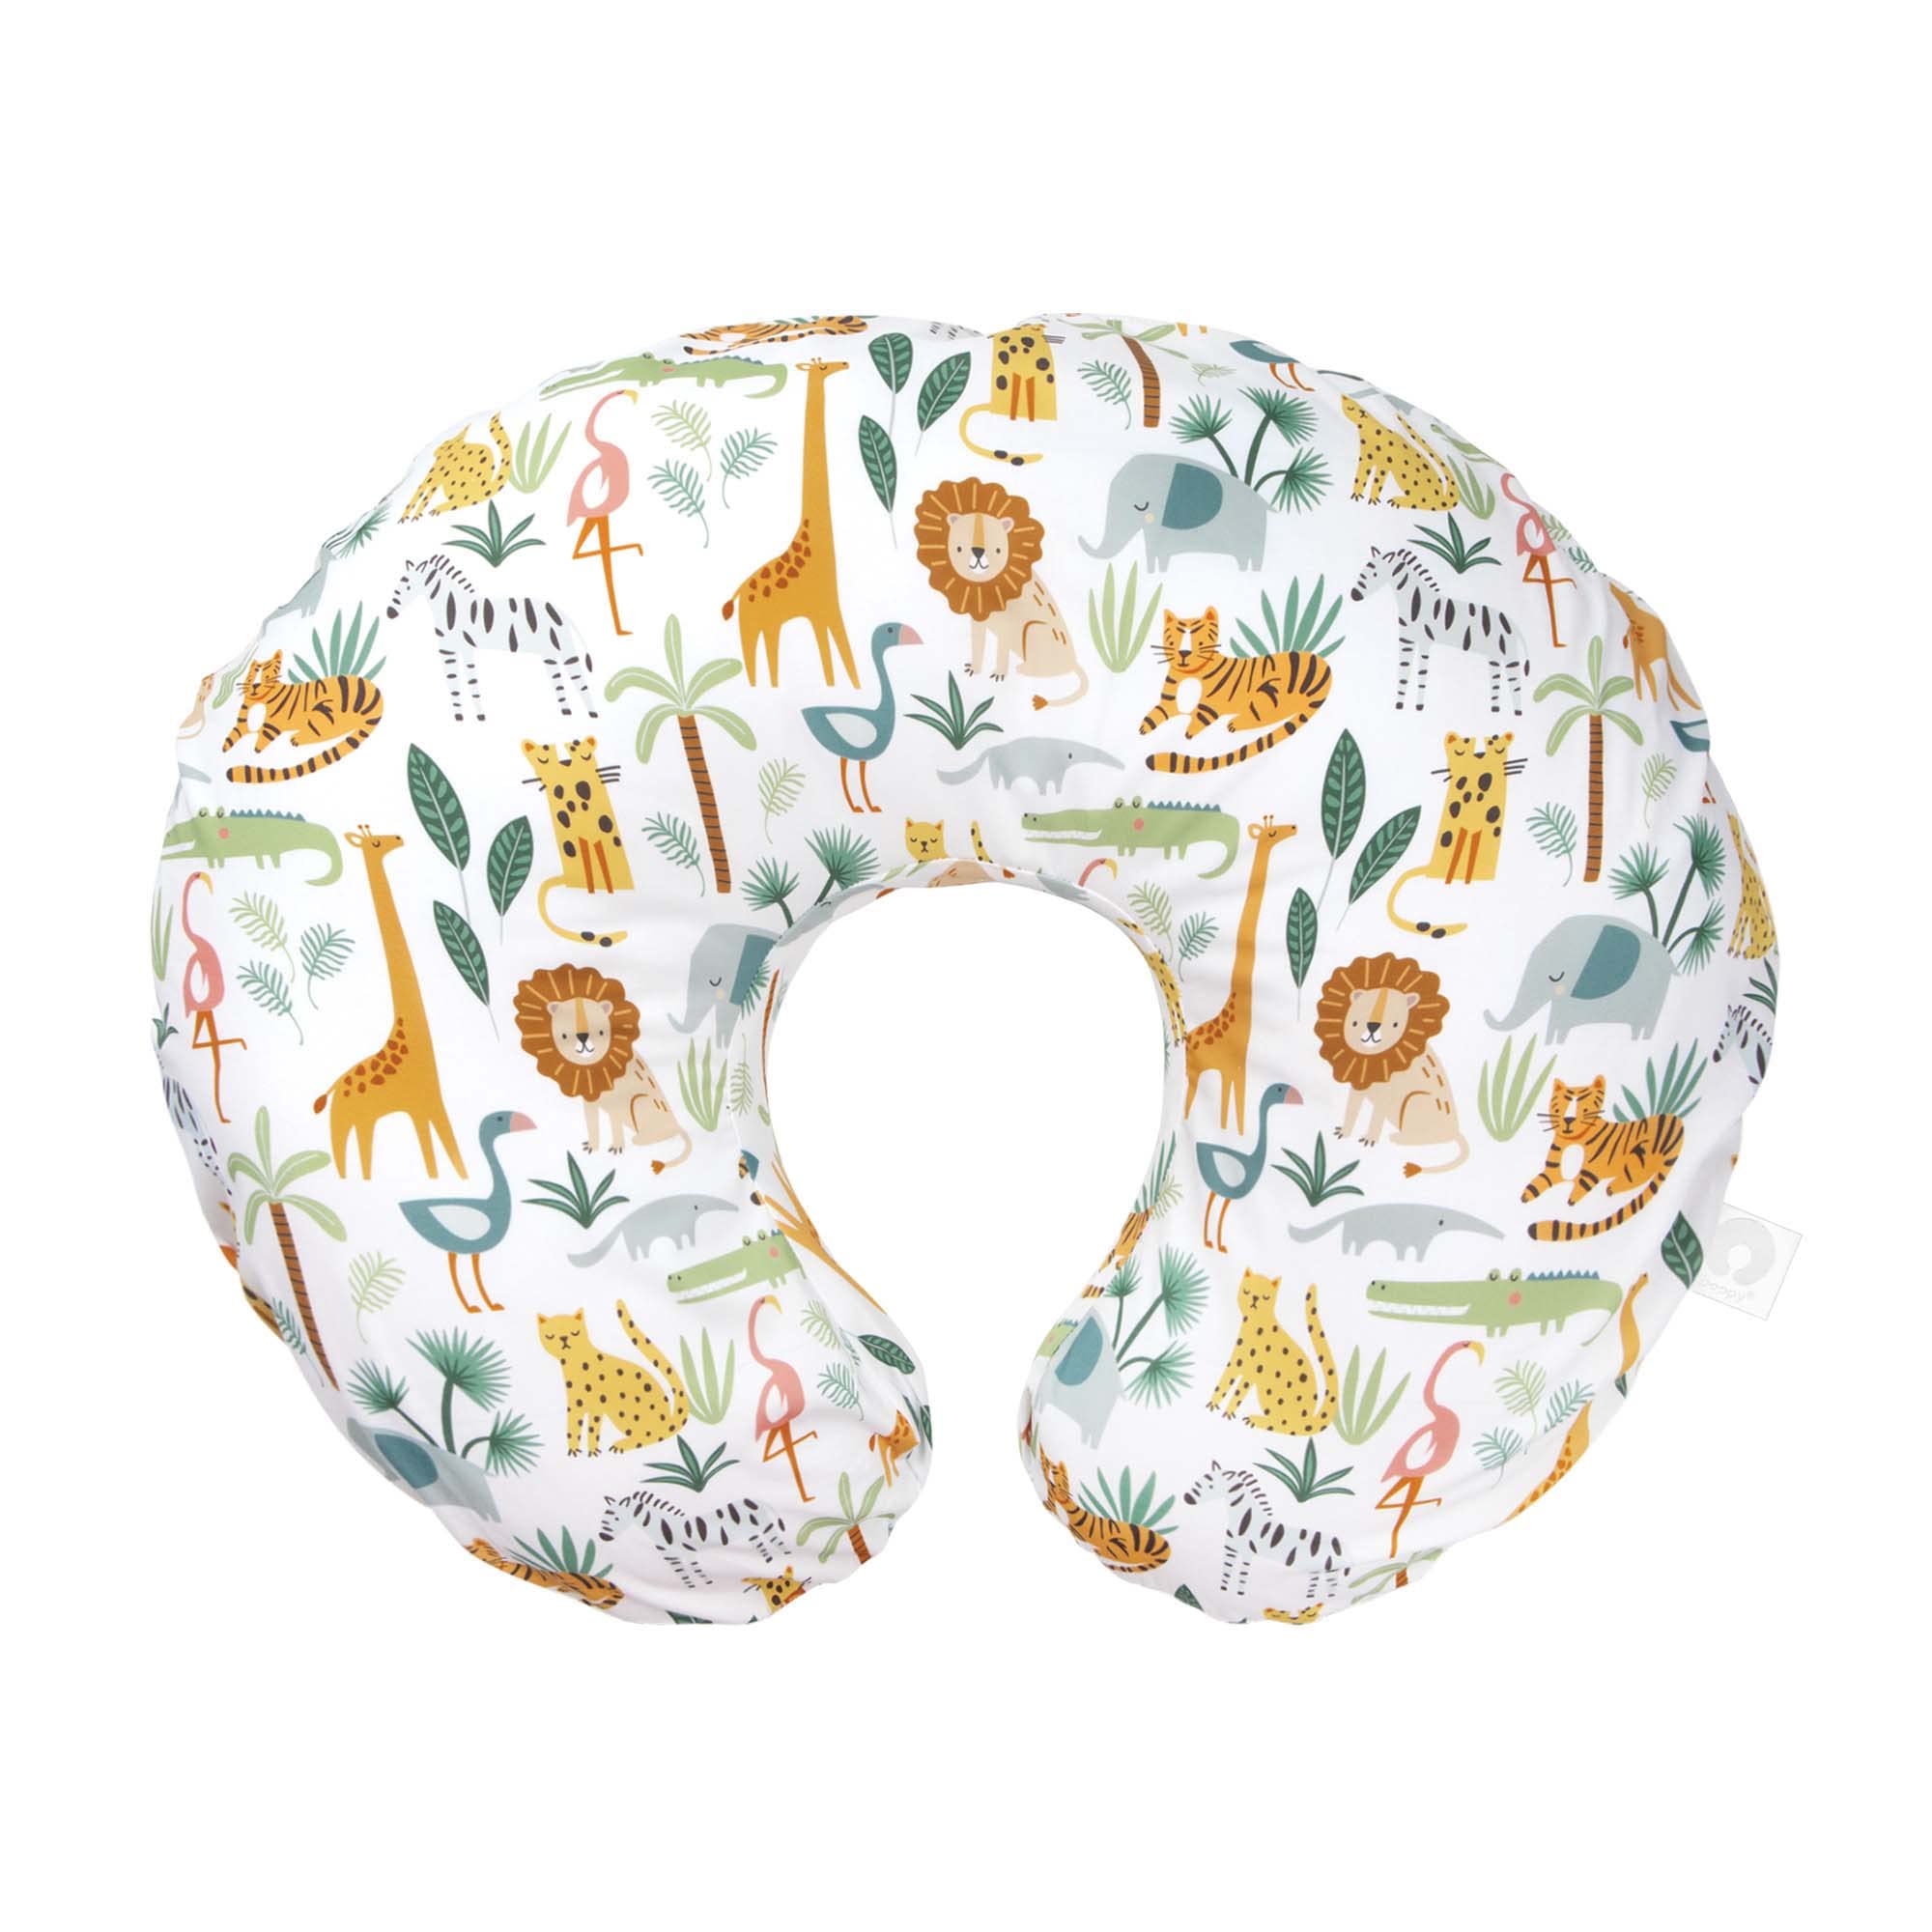 Boppy Original Support Nursing Pillow Cover, Colorful Wildlife, Soft Cotton Blend, Fits All Boppy Original Nursing Supports for Breastfeeding, Bottle Feeding, and Bonding, Cover Only